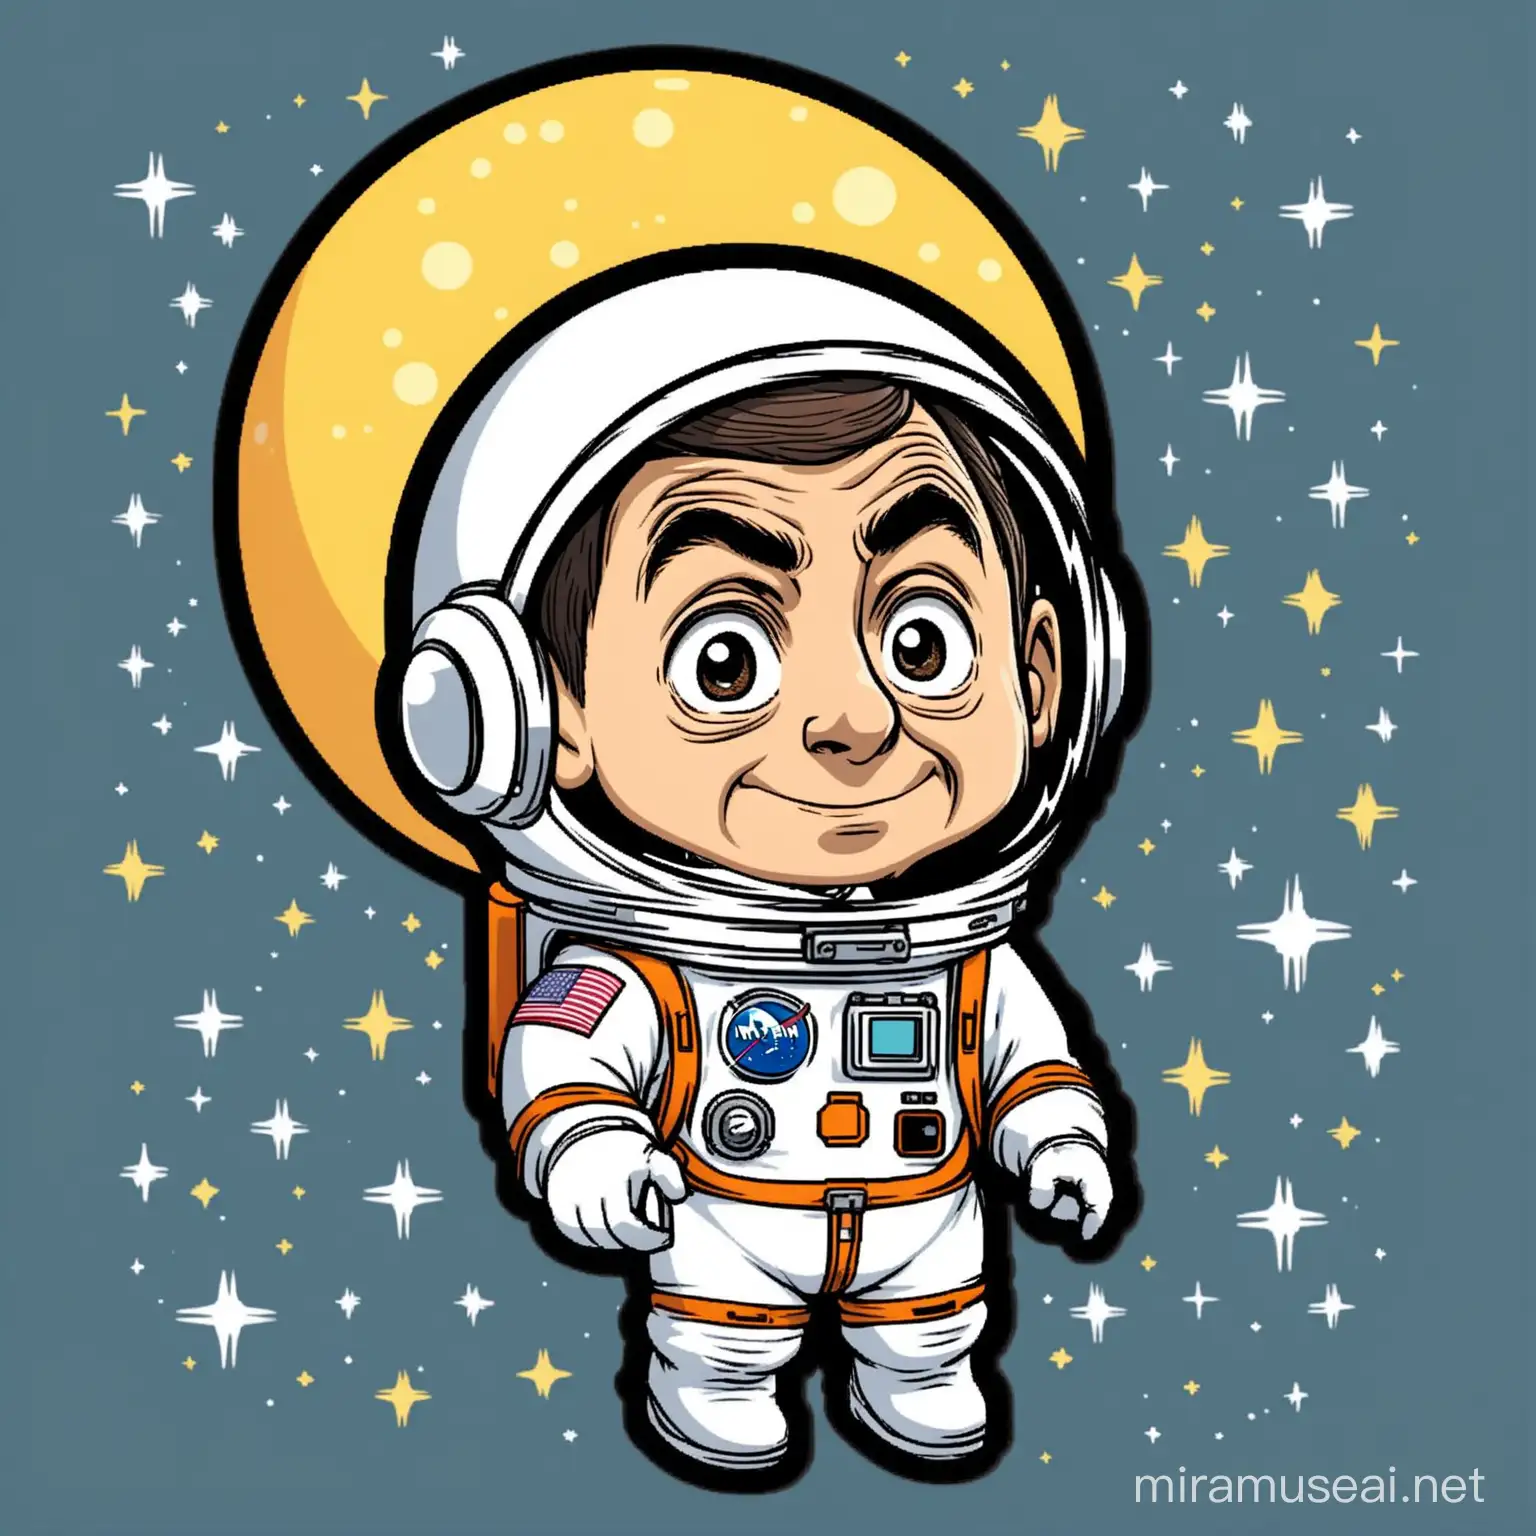 Mr Bean, with an astronaut helmet wearing his suit, on the moon, hilarious cartoon sticker